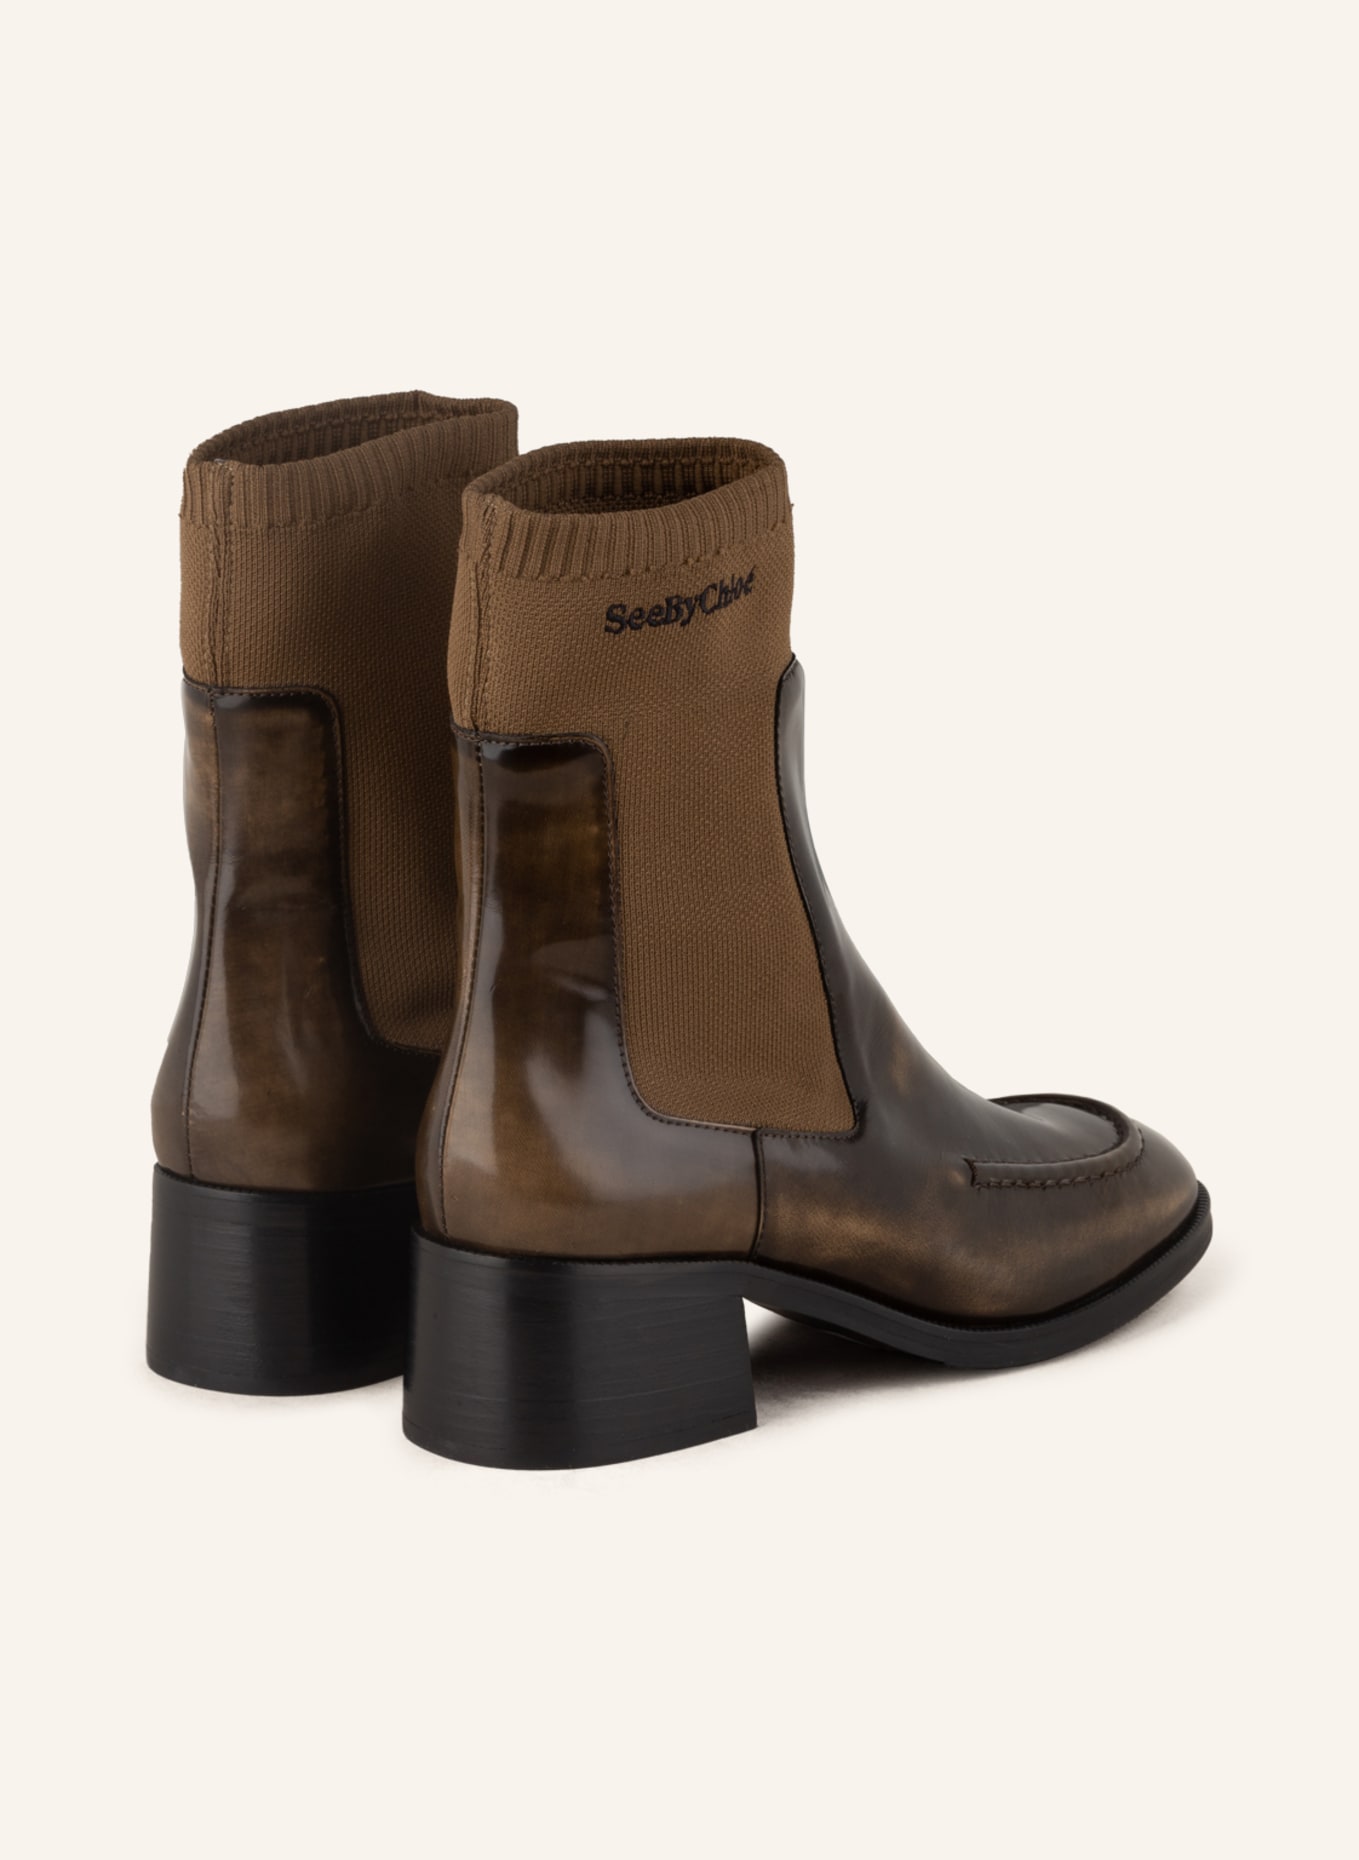 SEE BY CHLOÉ Chelsea-Boots WENDY, Barva: 110/415 Olive (Obrázek 2)